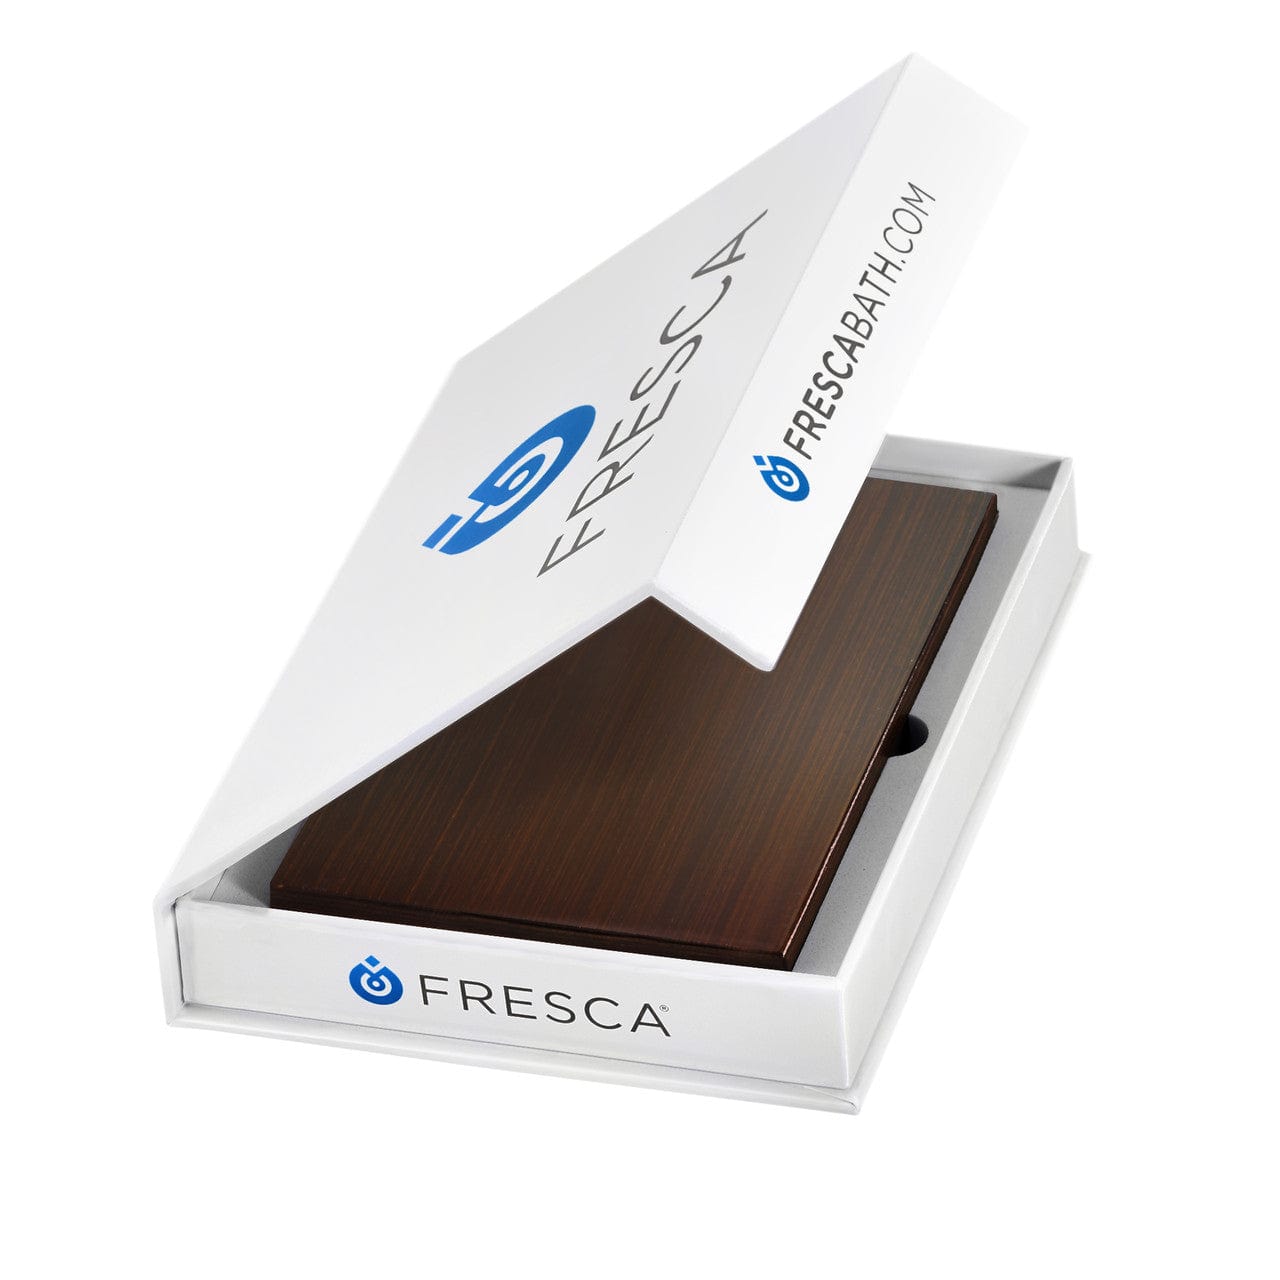 Fresca Wood Color Sample in Wenge in box